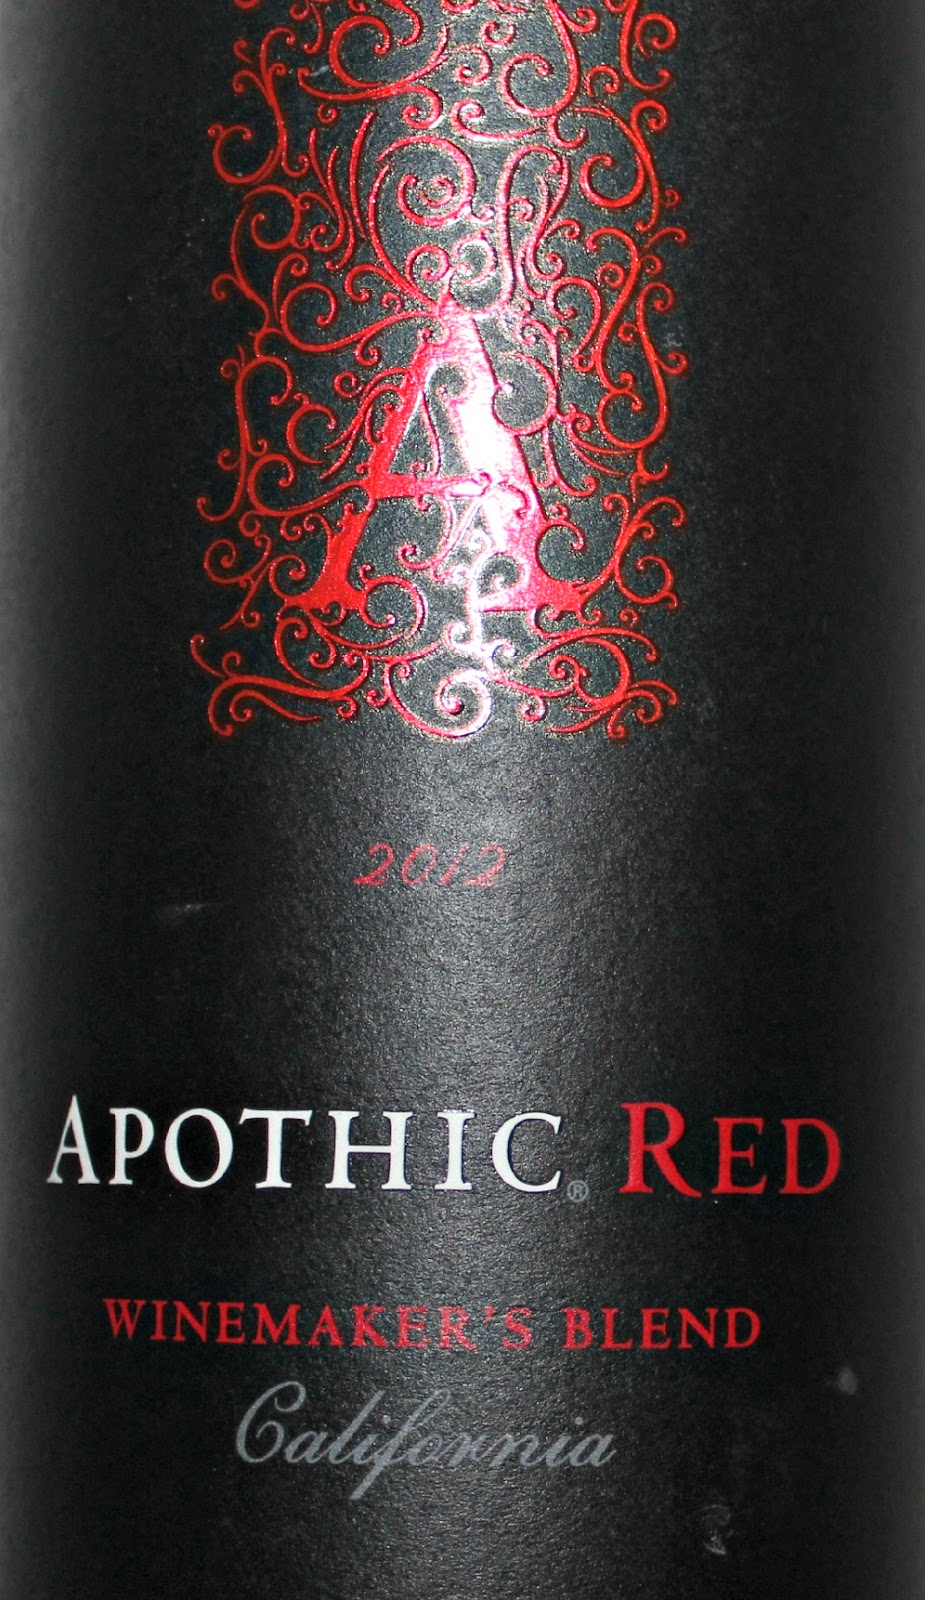 wine-review-apothic-red-wine-2012